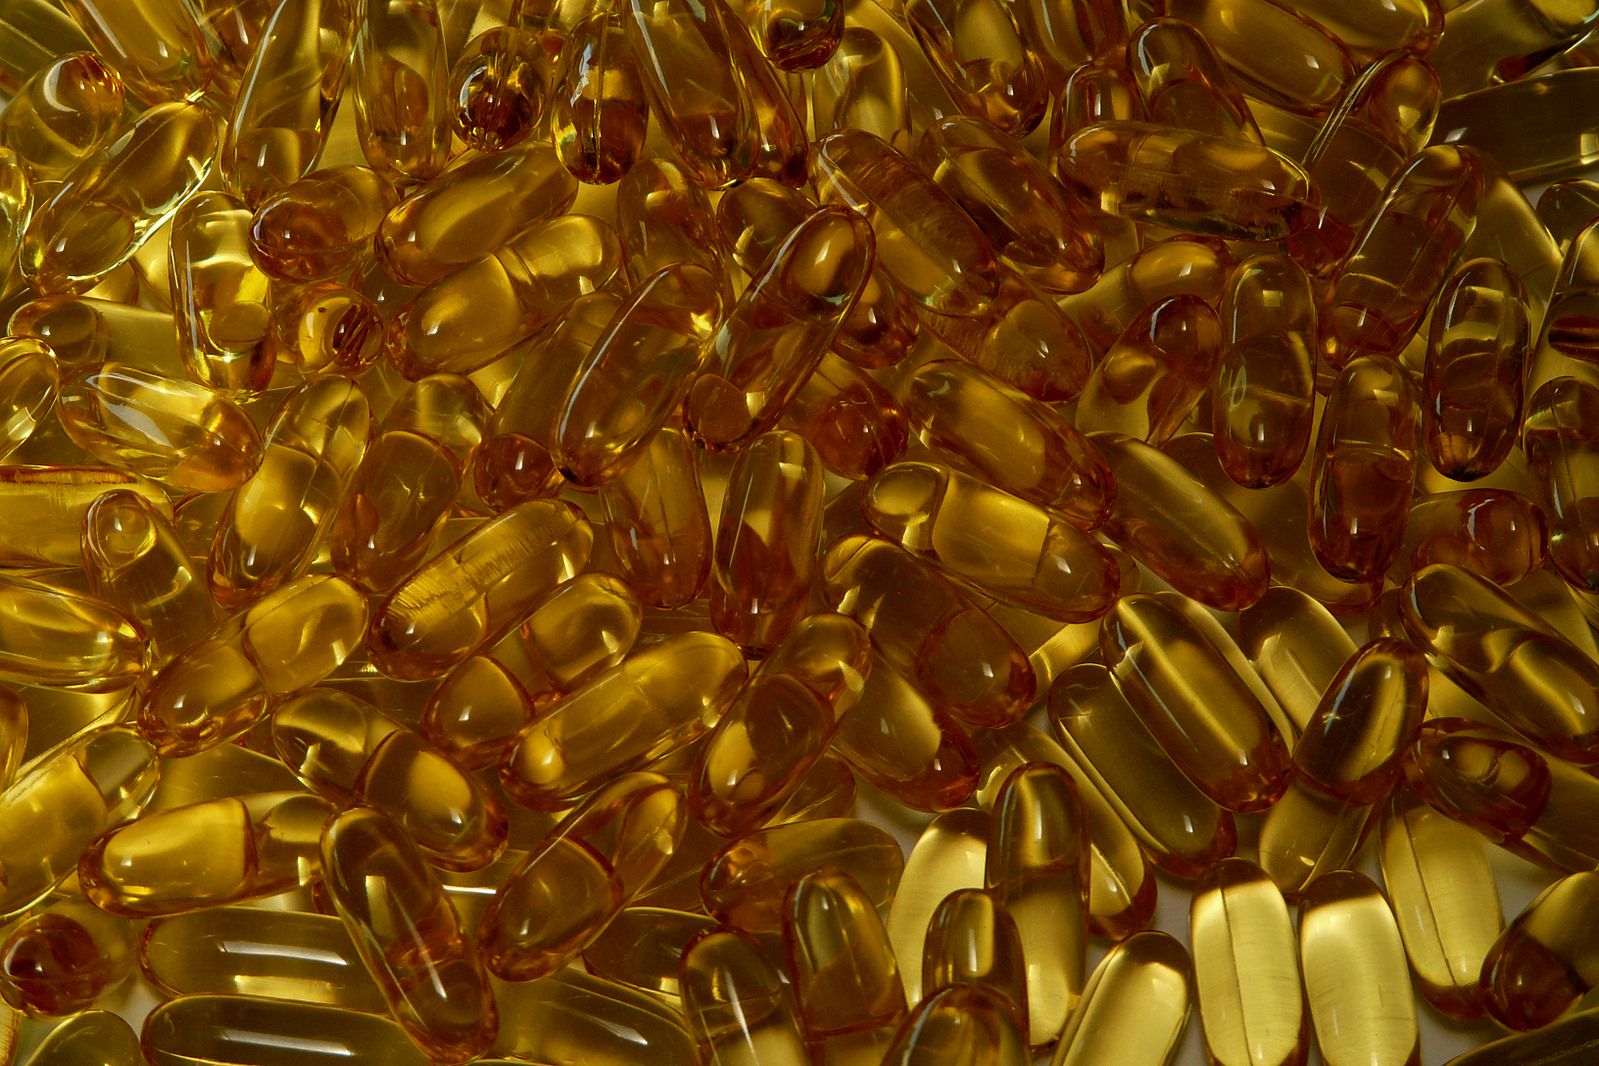 Difference Between Fish Oil and Cod Liver Oil